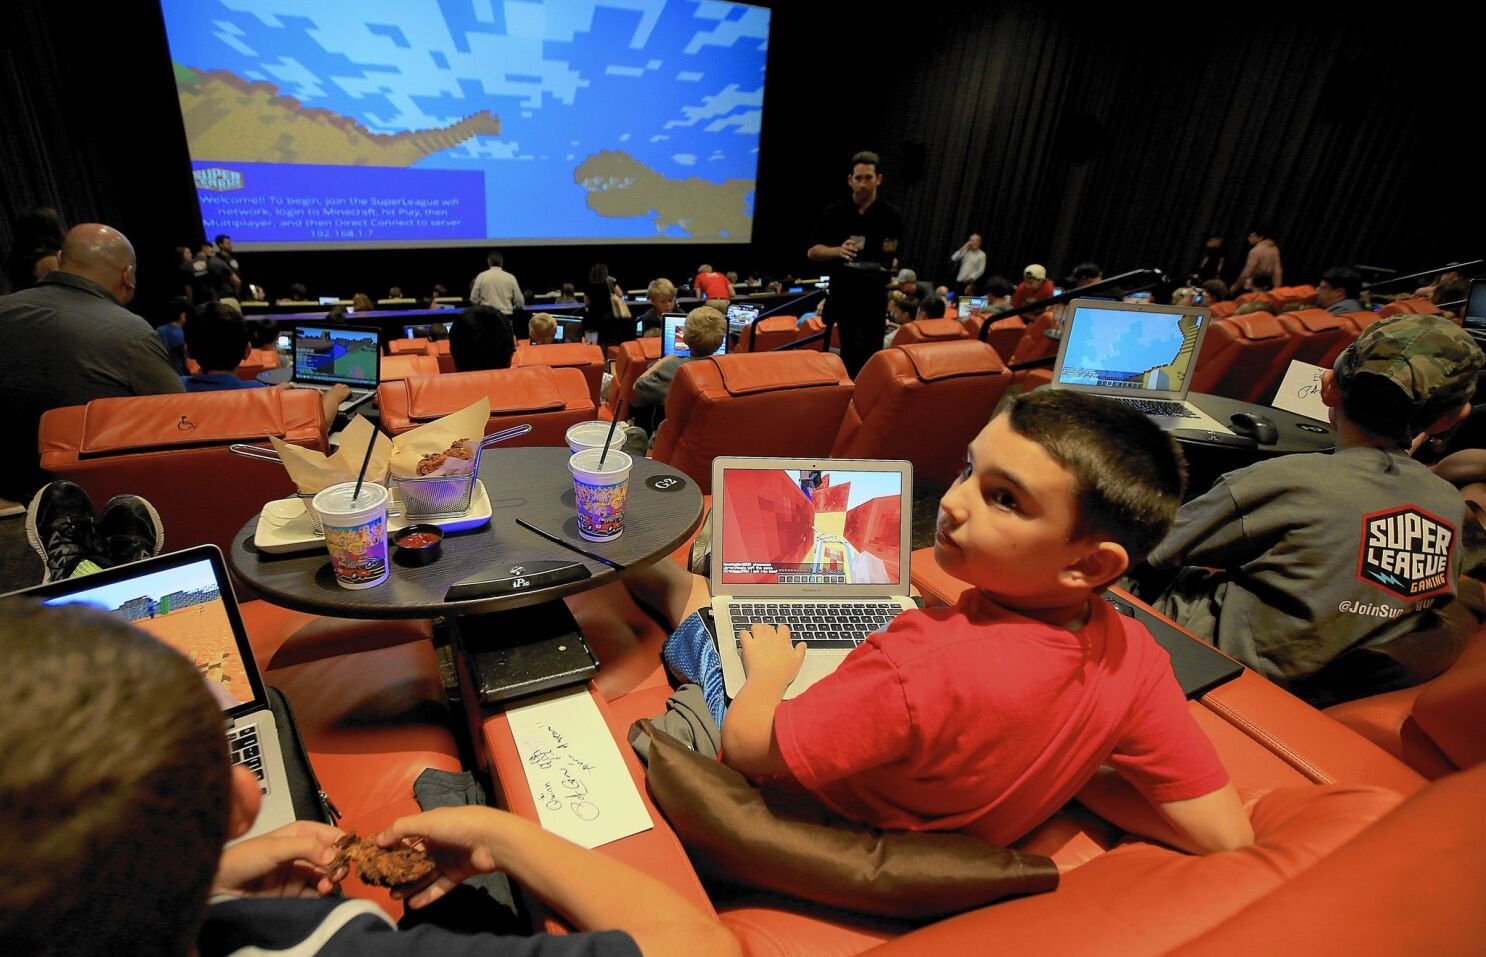 Movie theaters branch out to host video game contests and other events -  Los Angeles Times